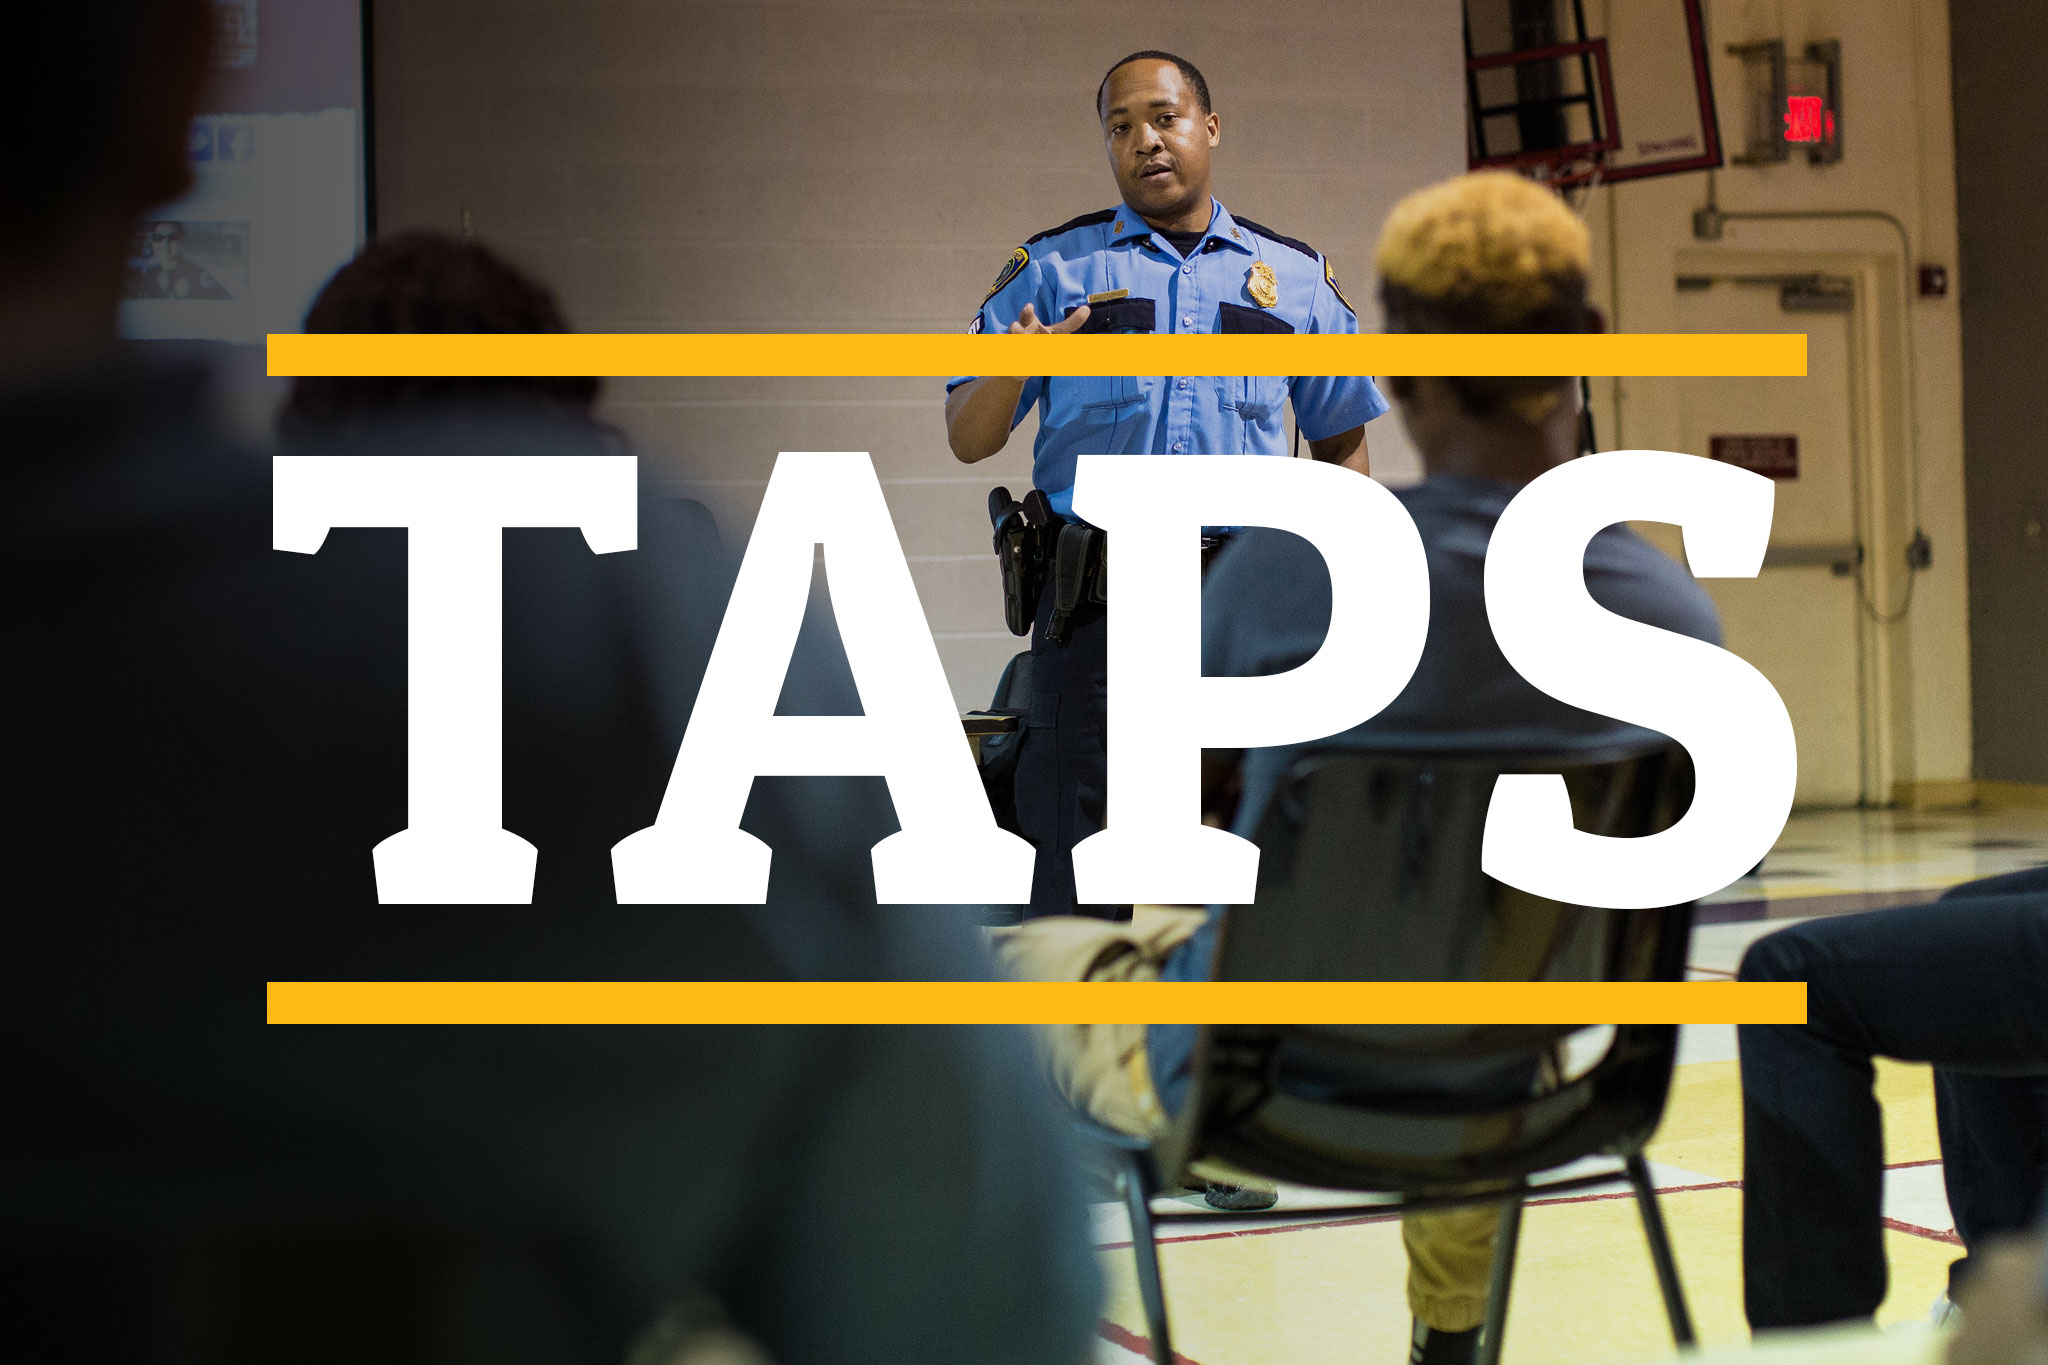 Promotional Image: In 2012, UHCL Professor of Criminology Everett Penn and Houston Police Department Assistant Chief Brian Lumpkin founded the Teen and Police Service Academy (TAPS) to bridge the divide between at-risk youth and law enforcement. Nearly three years later, the program has expanded to cities around the nation and in other countries, changing lives along the way. The image links to http://uhclthesignal.com/wordpress/tapspage/ - the special topic page examining TAPS. Photo by The Signal reporter Travis Pennington.